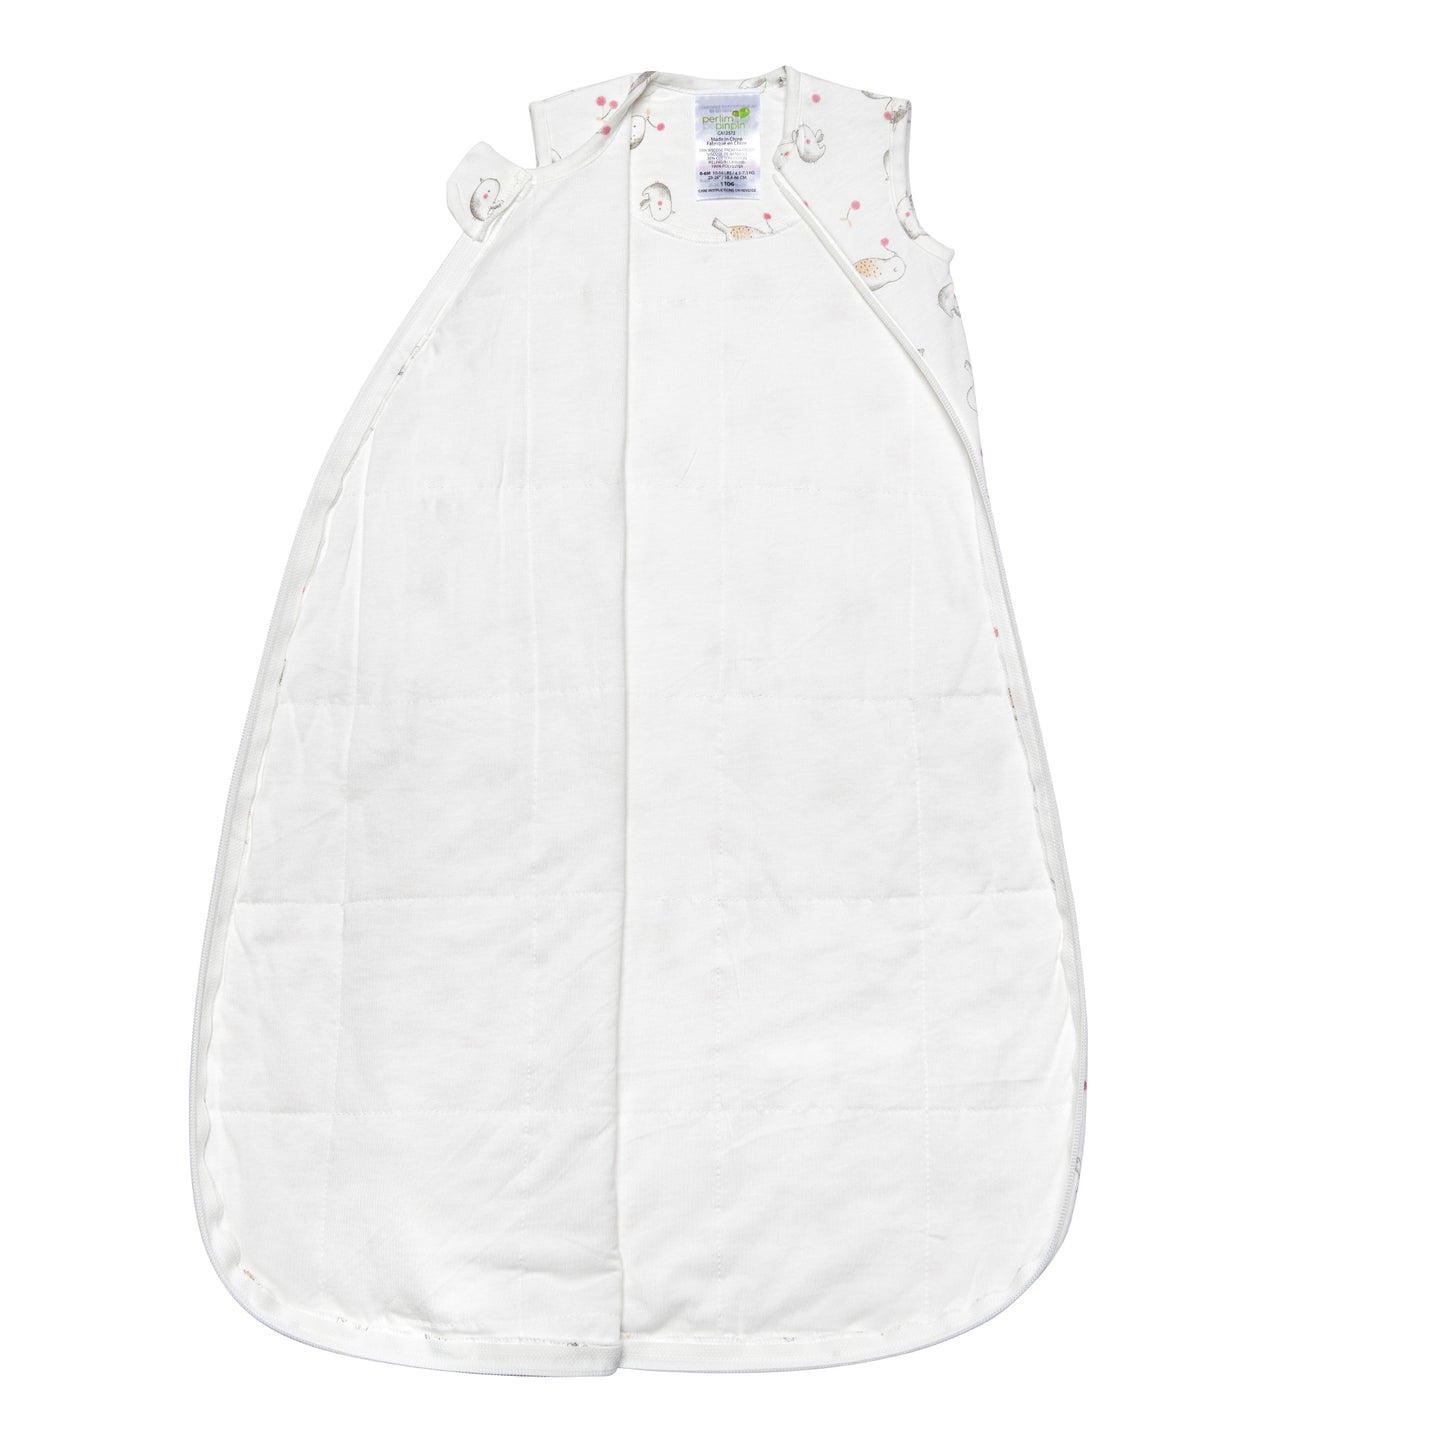 Quilted bamboo sleep sack - Flickers (2.5 togs)